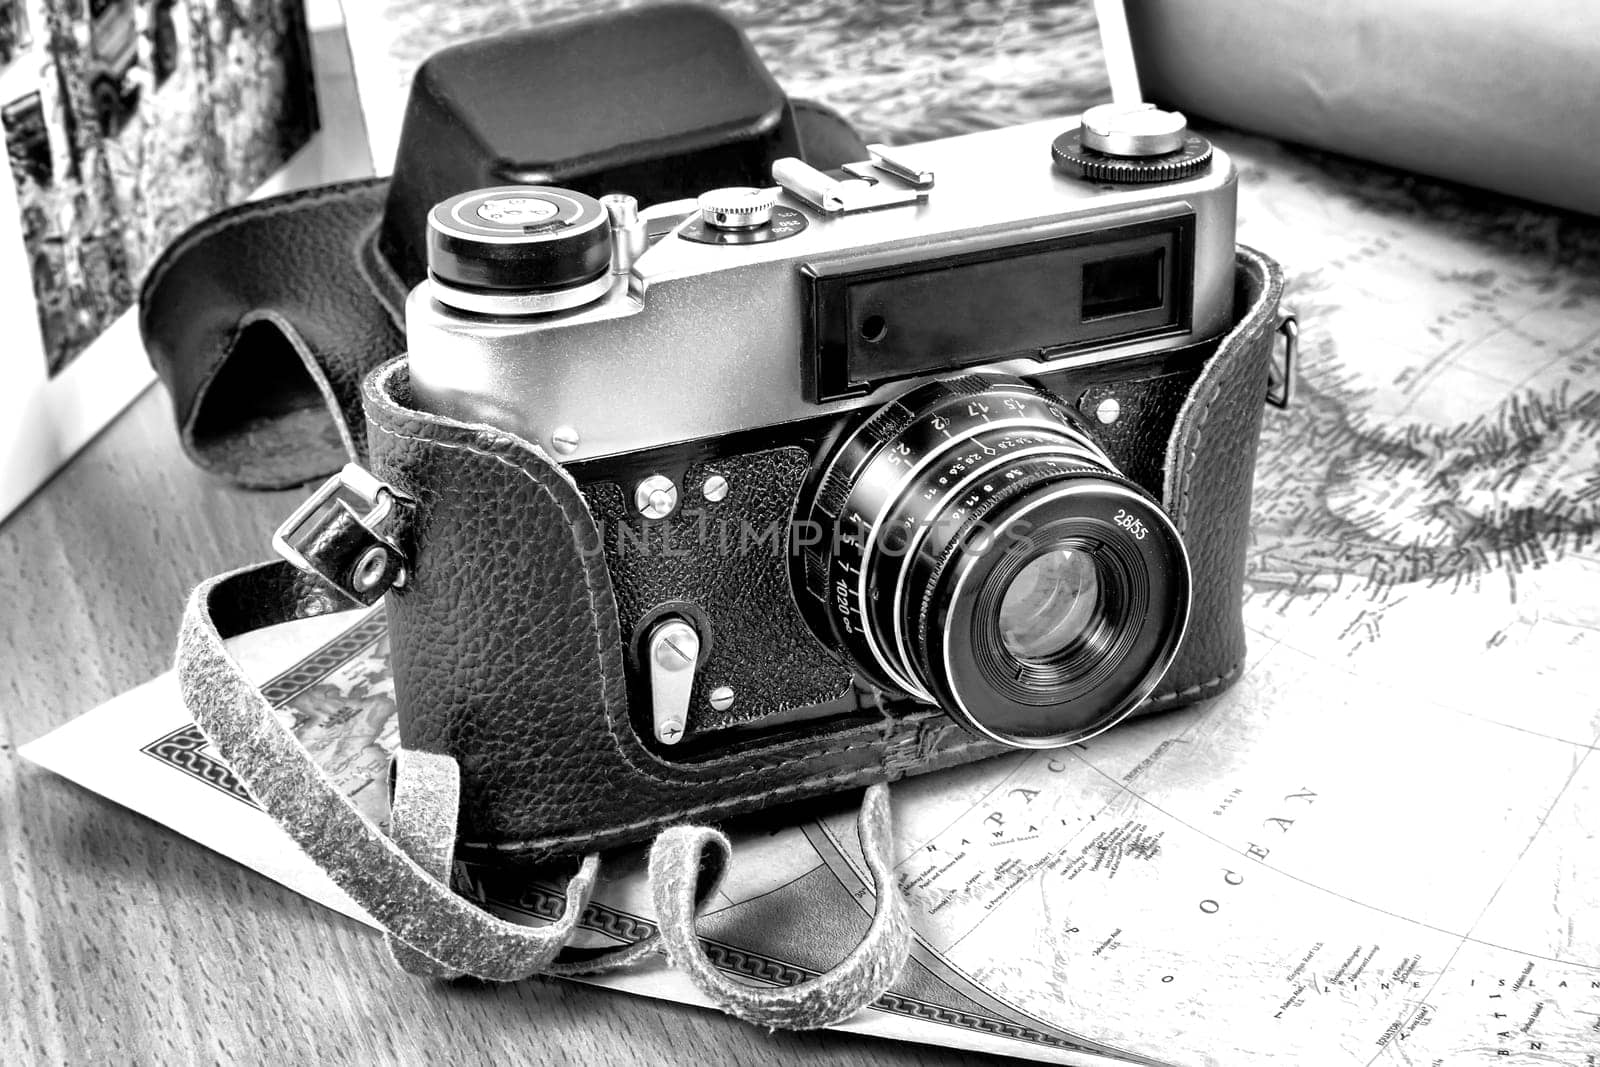 Items needed for the trip: camera, map of the world. Vintage items in retro style.